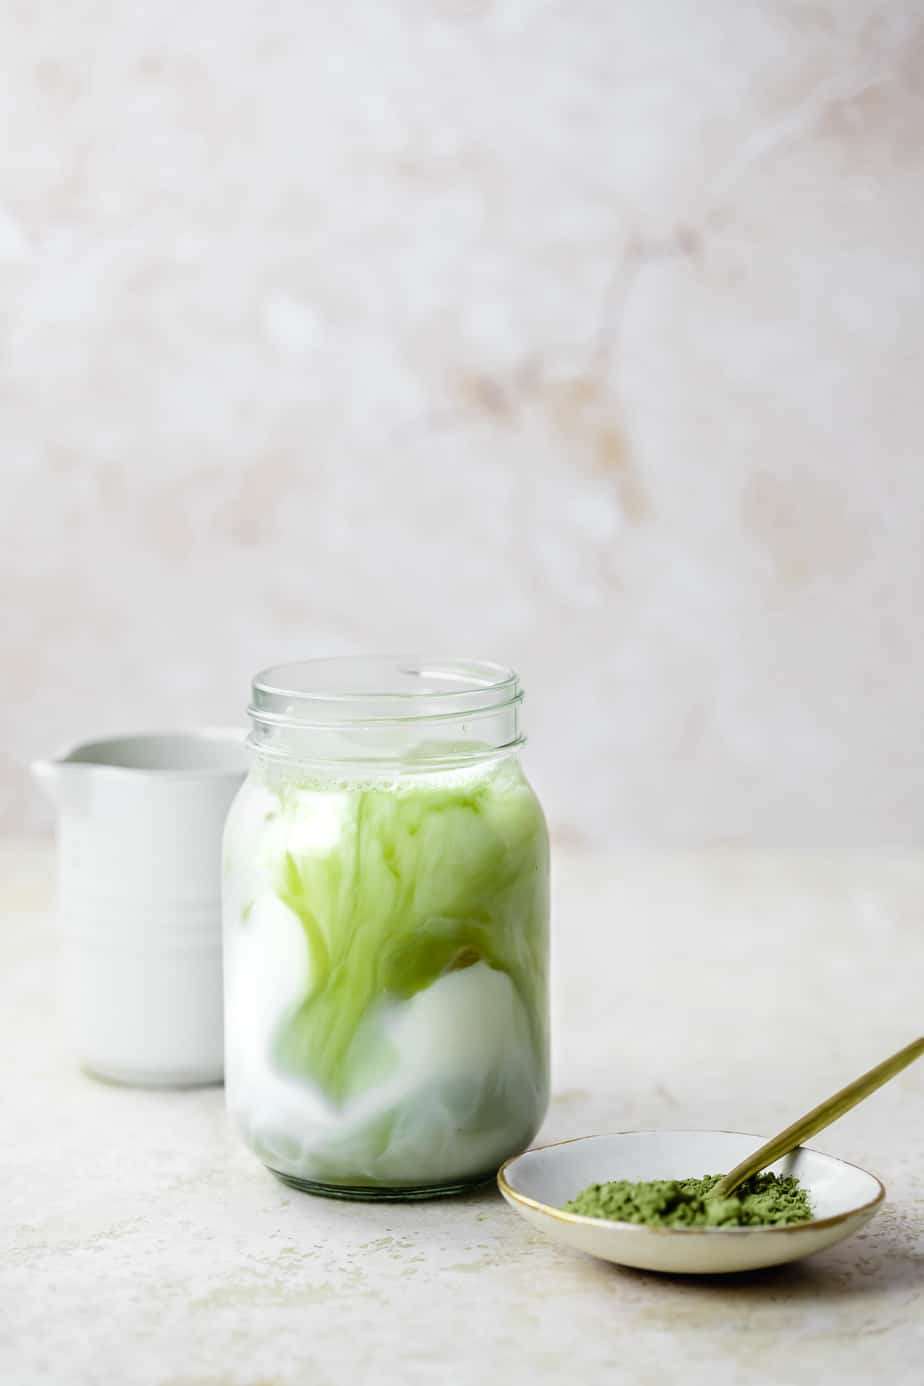 A matcha latte swirled into milk with ice cubes.